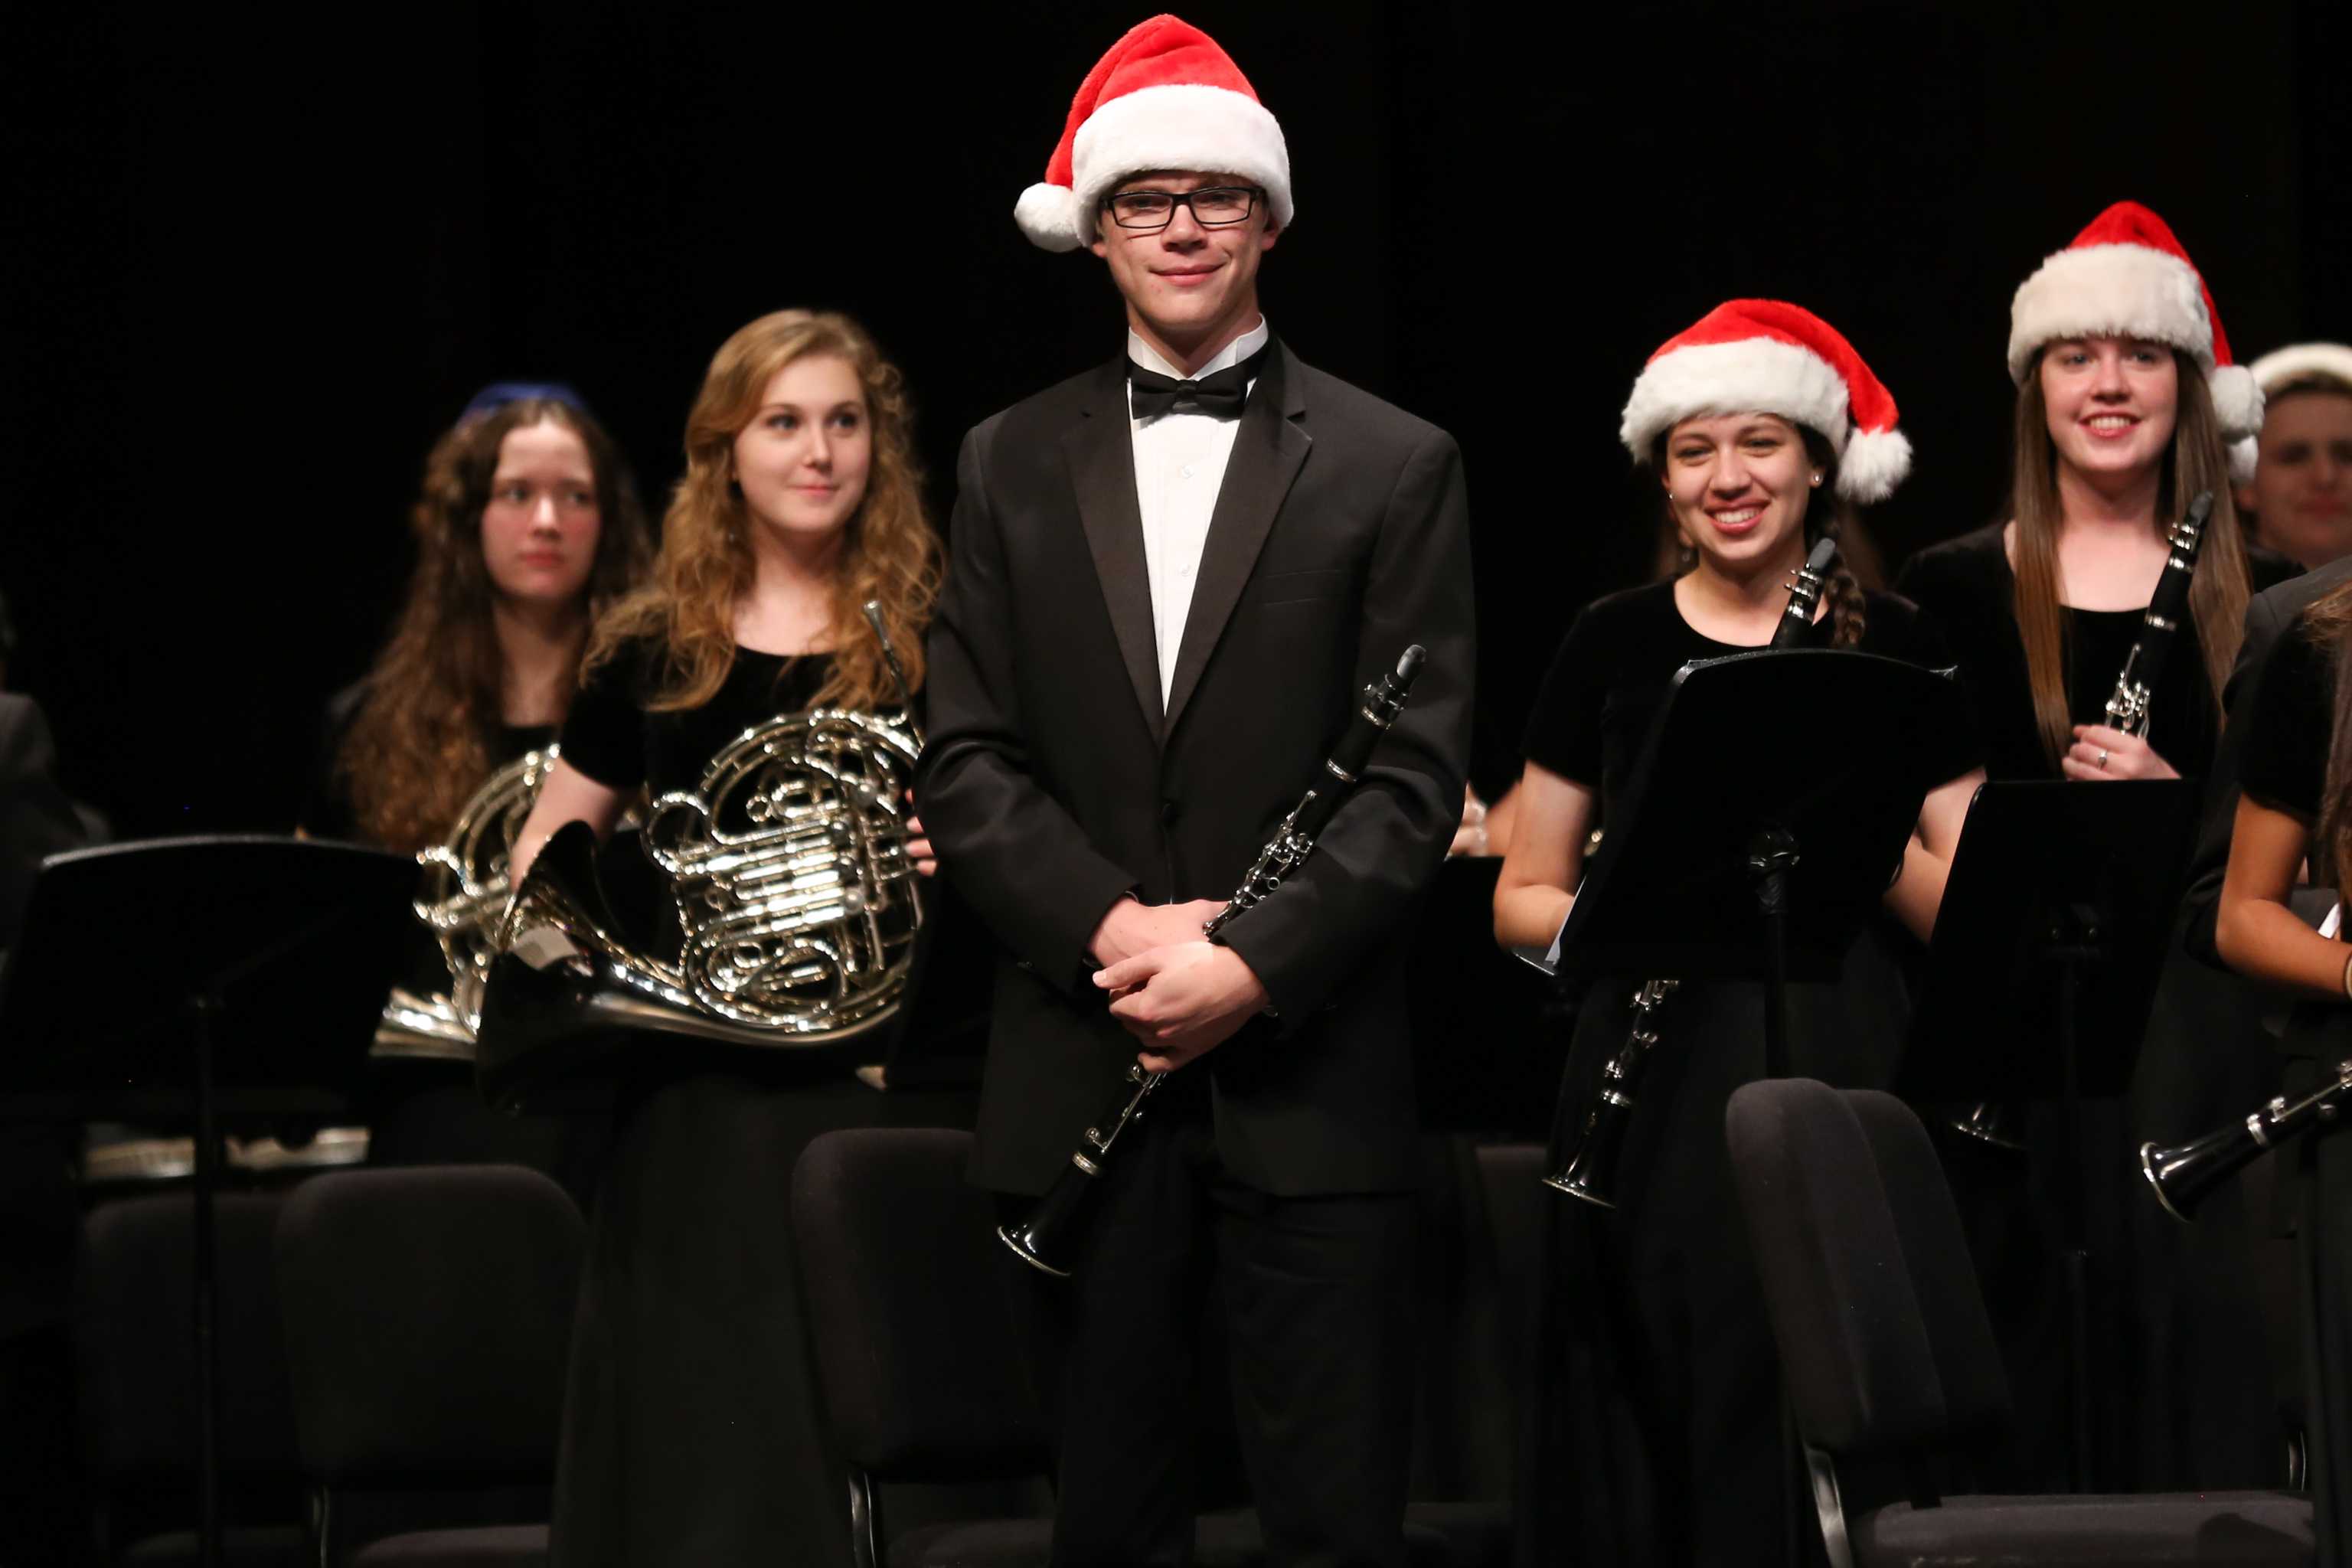 Westwoods+bands+performed+their+annual+Winter+Concert+at+the+RRISD+Performing+Arts+Center+on+Monday%2C+Dec+8.